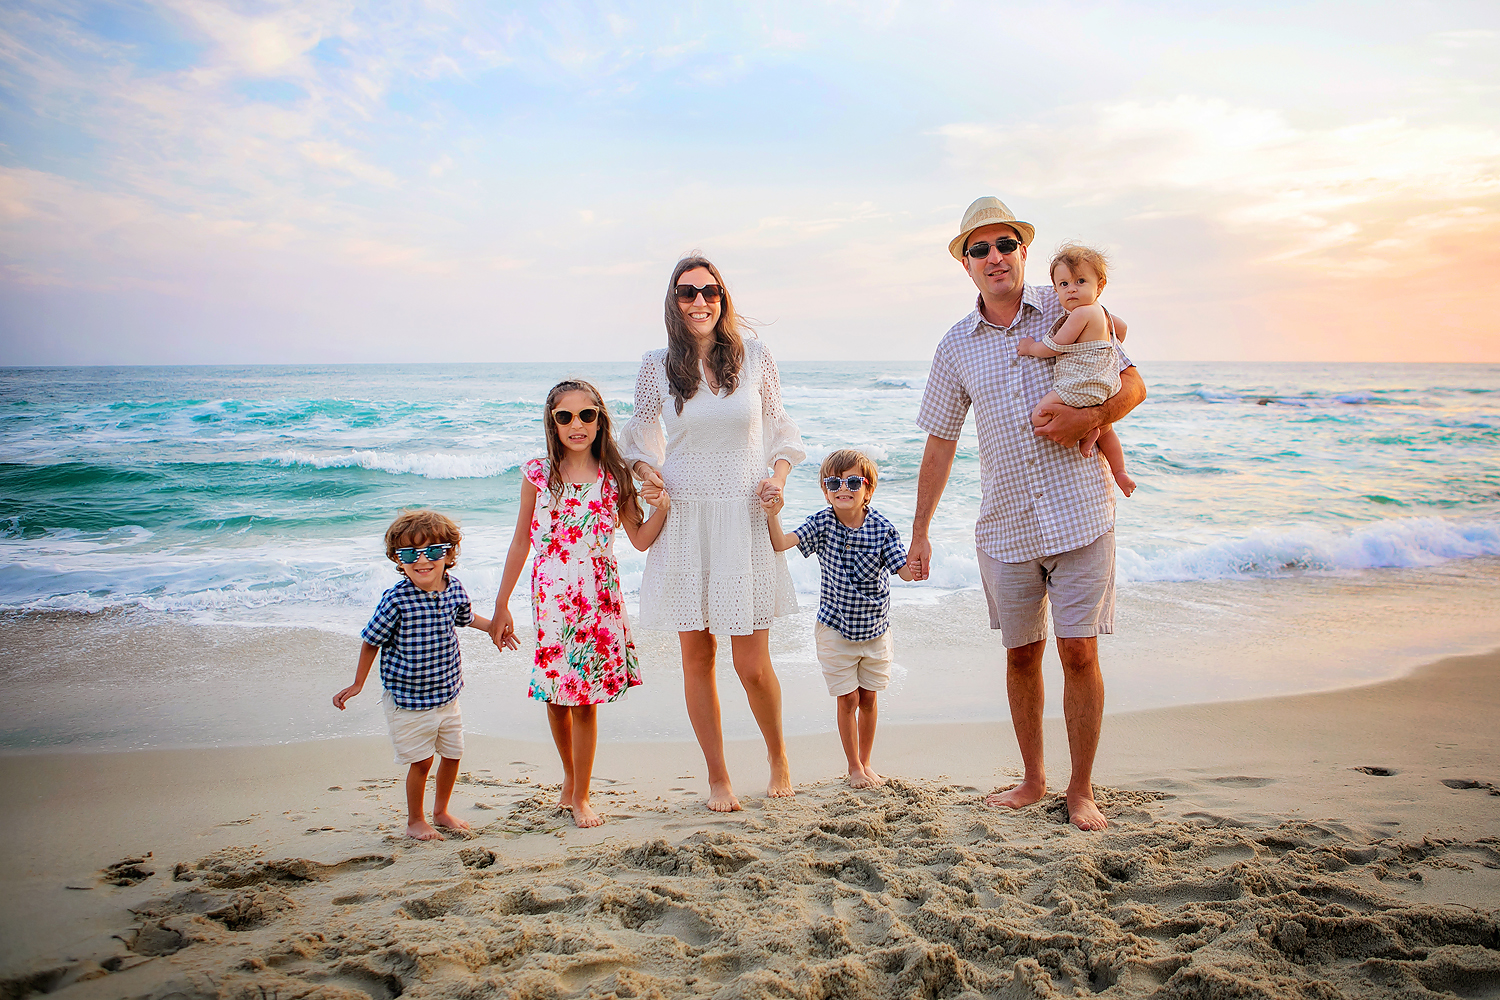 Photography by San Diego Family Photographer. Photo is of 6 people standing outdoors.